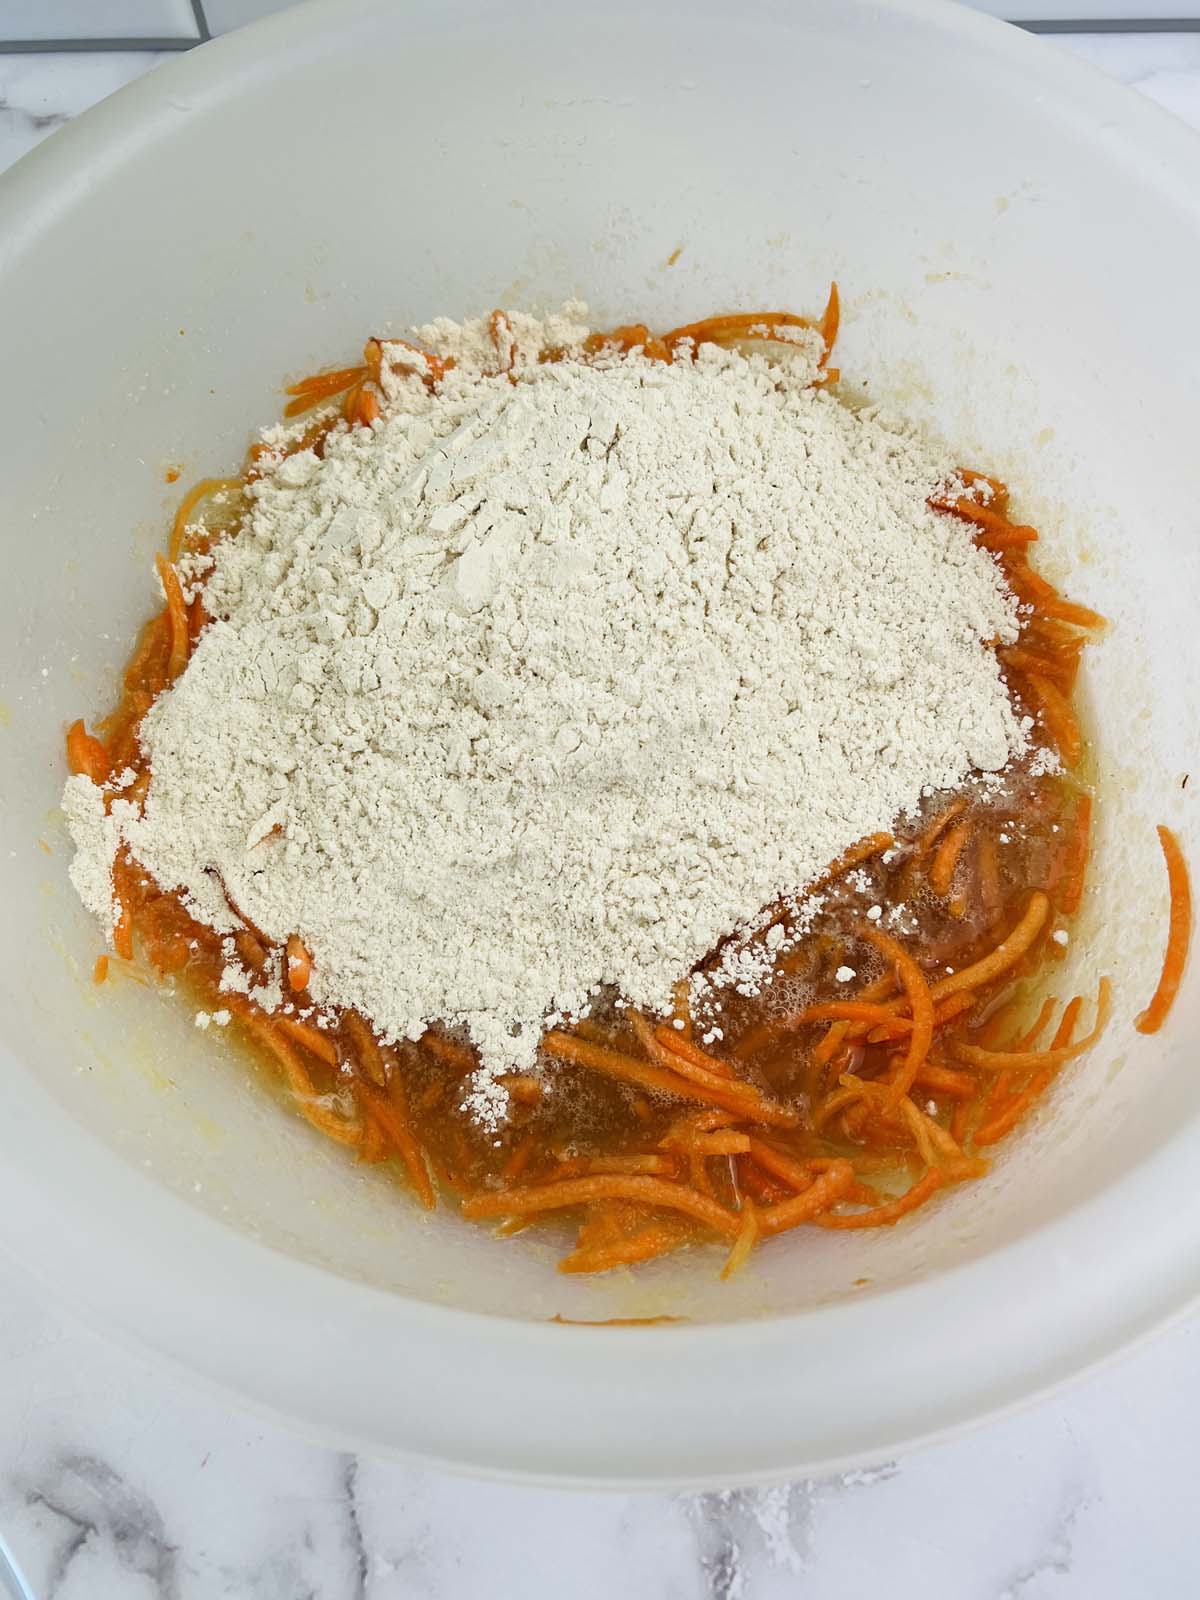 The flour mixture on top of the carrot mixture.